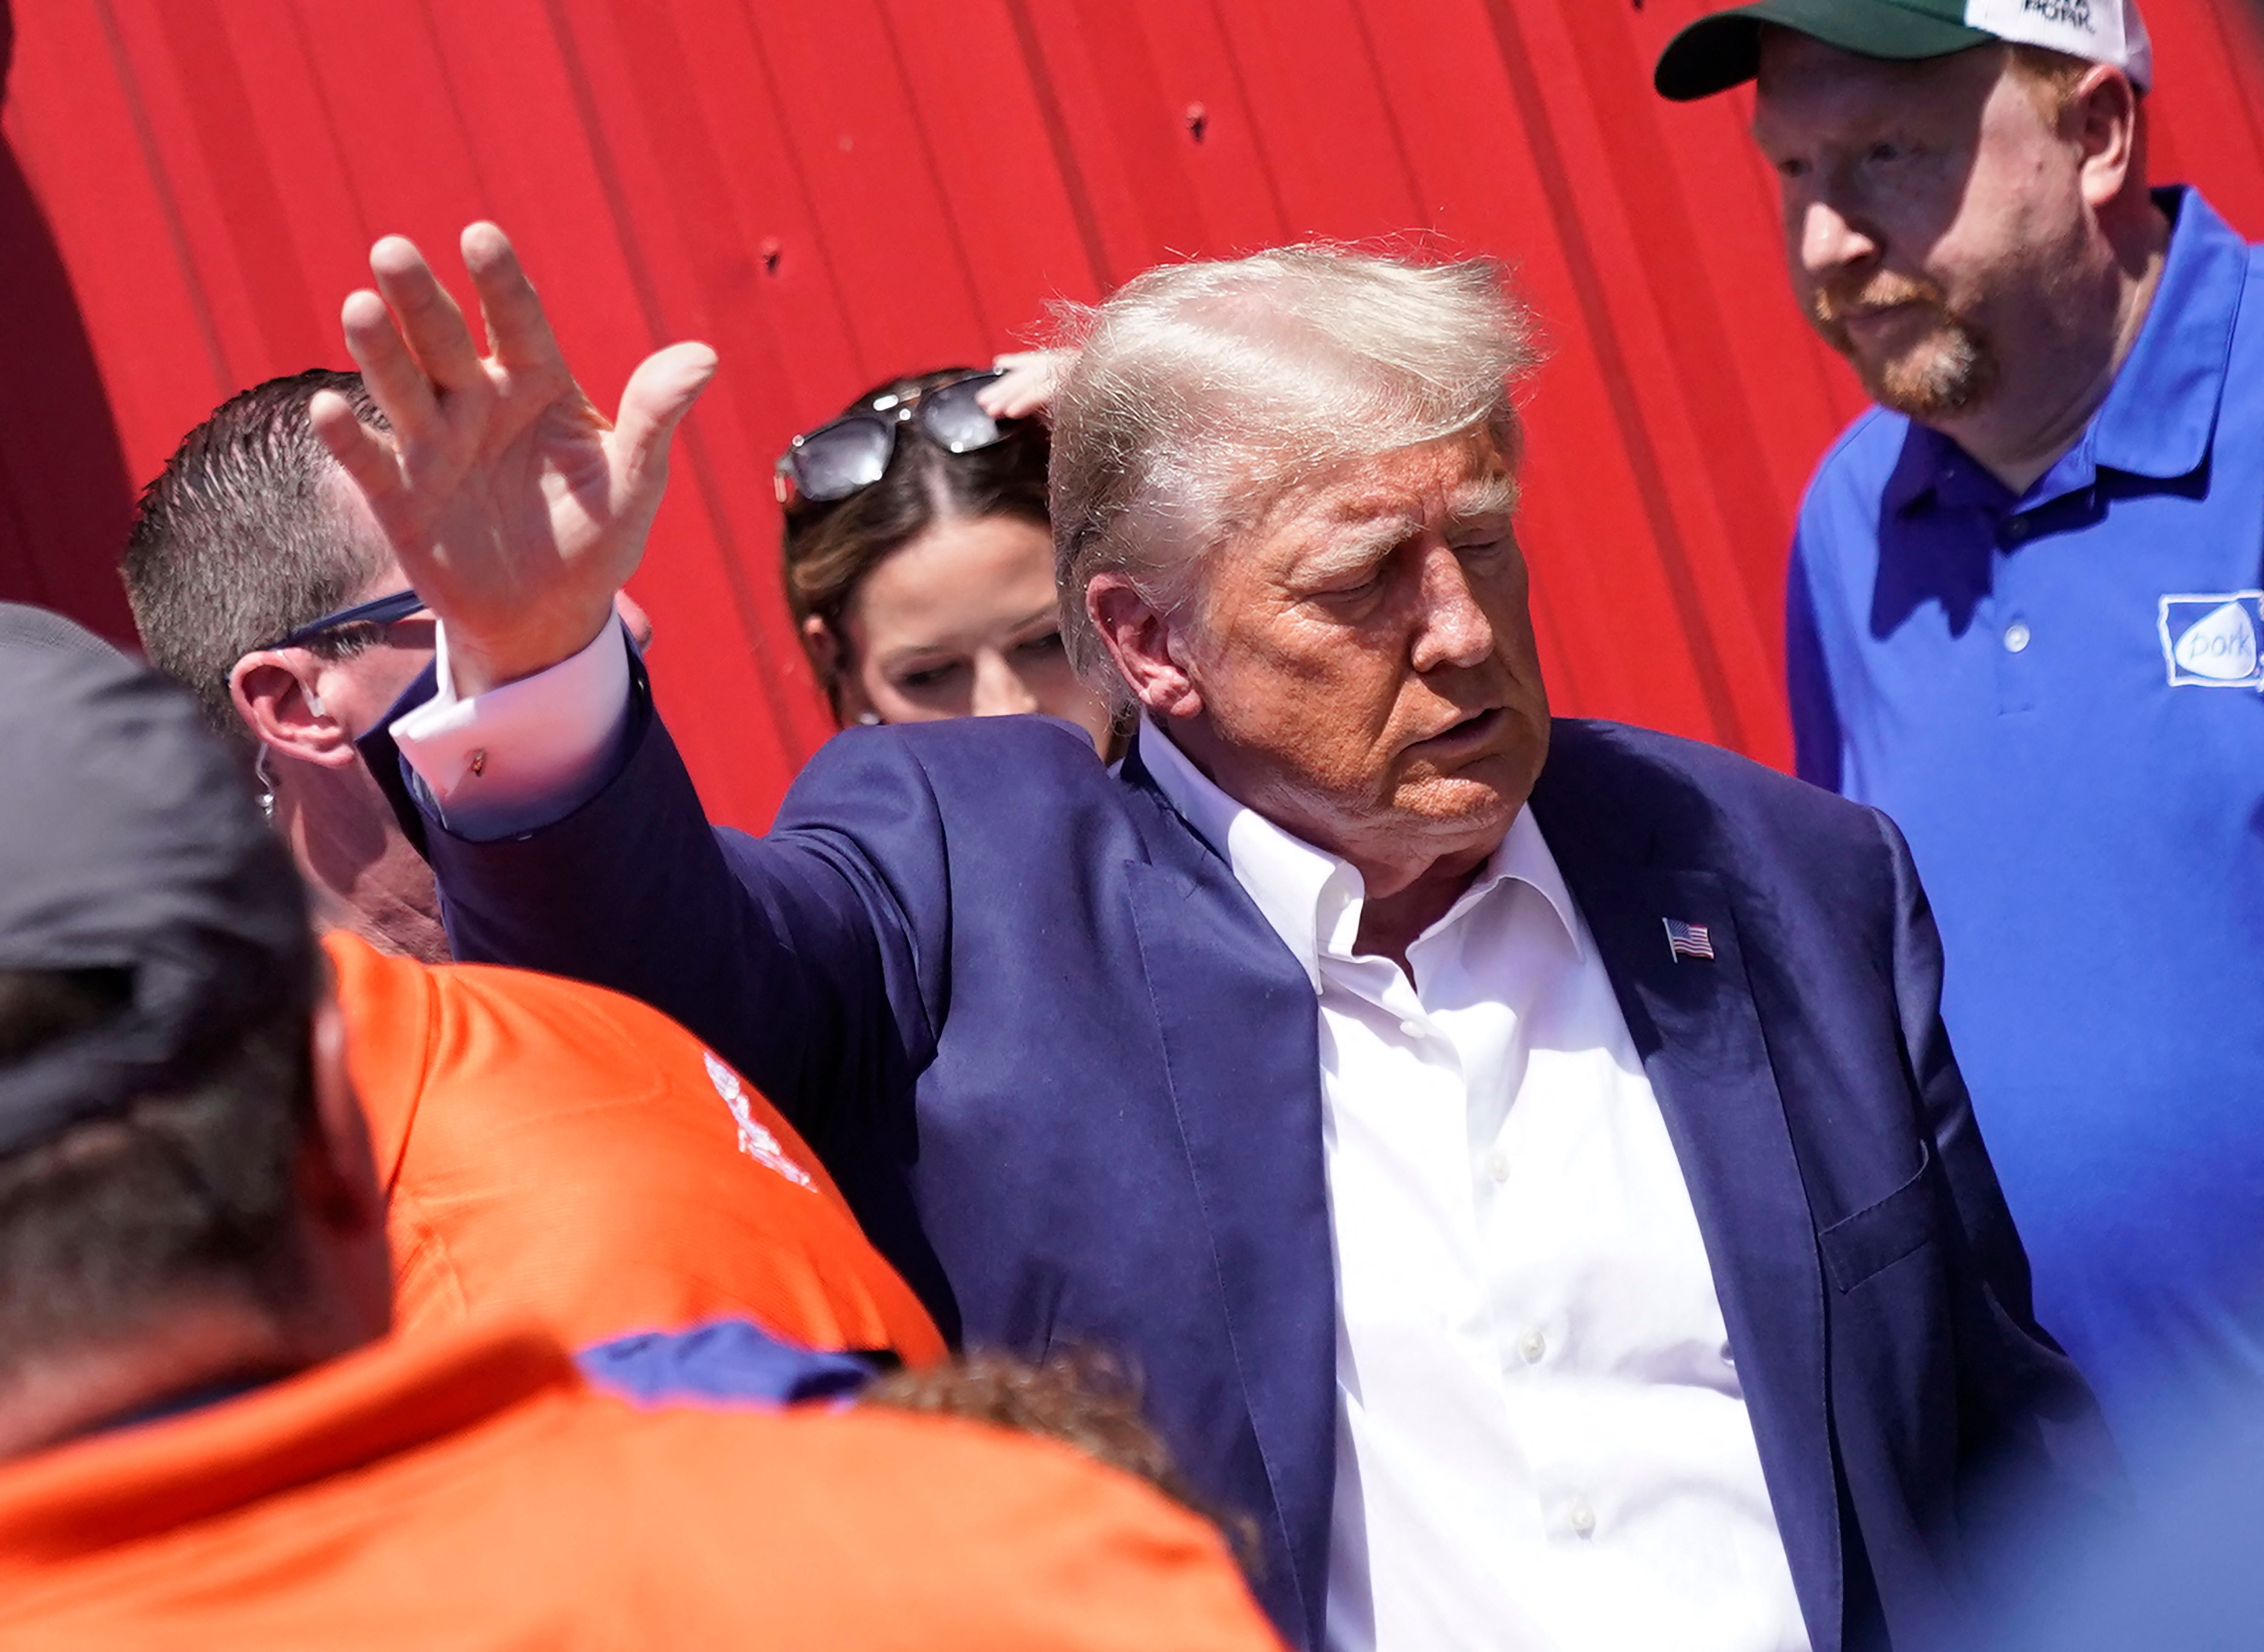 Former president and 2024 presidential hopeful Donald Trump visits the Iowa Pork Producers Tent during the Iowa State Fair in Des Moines on 12 August 2023